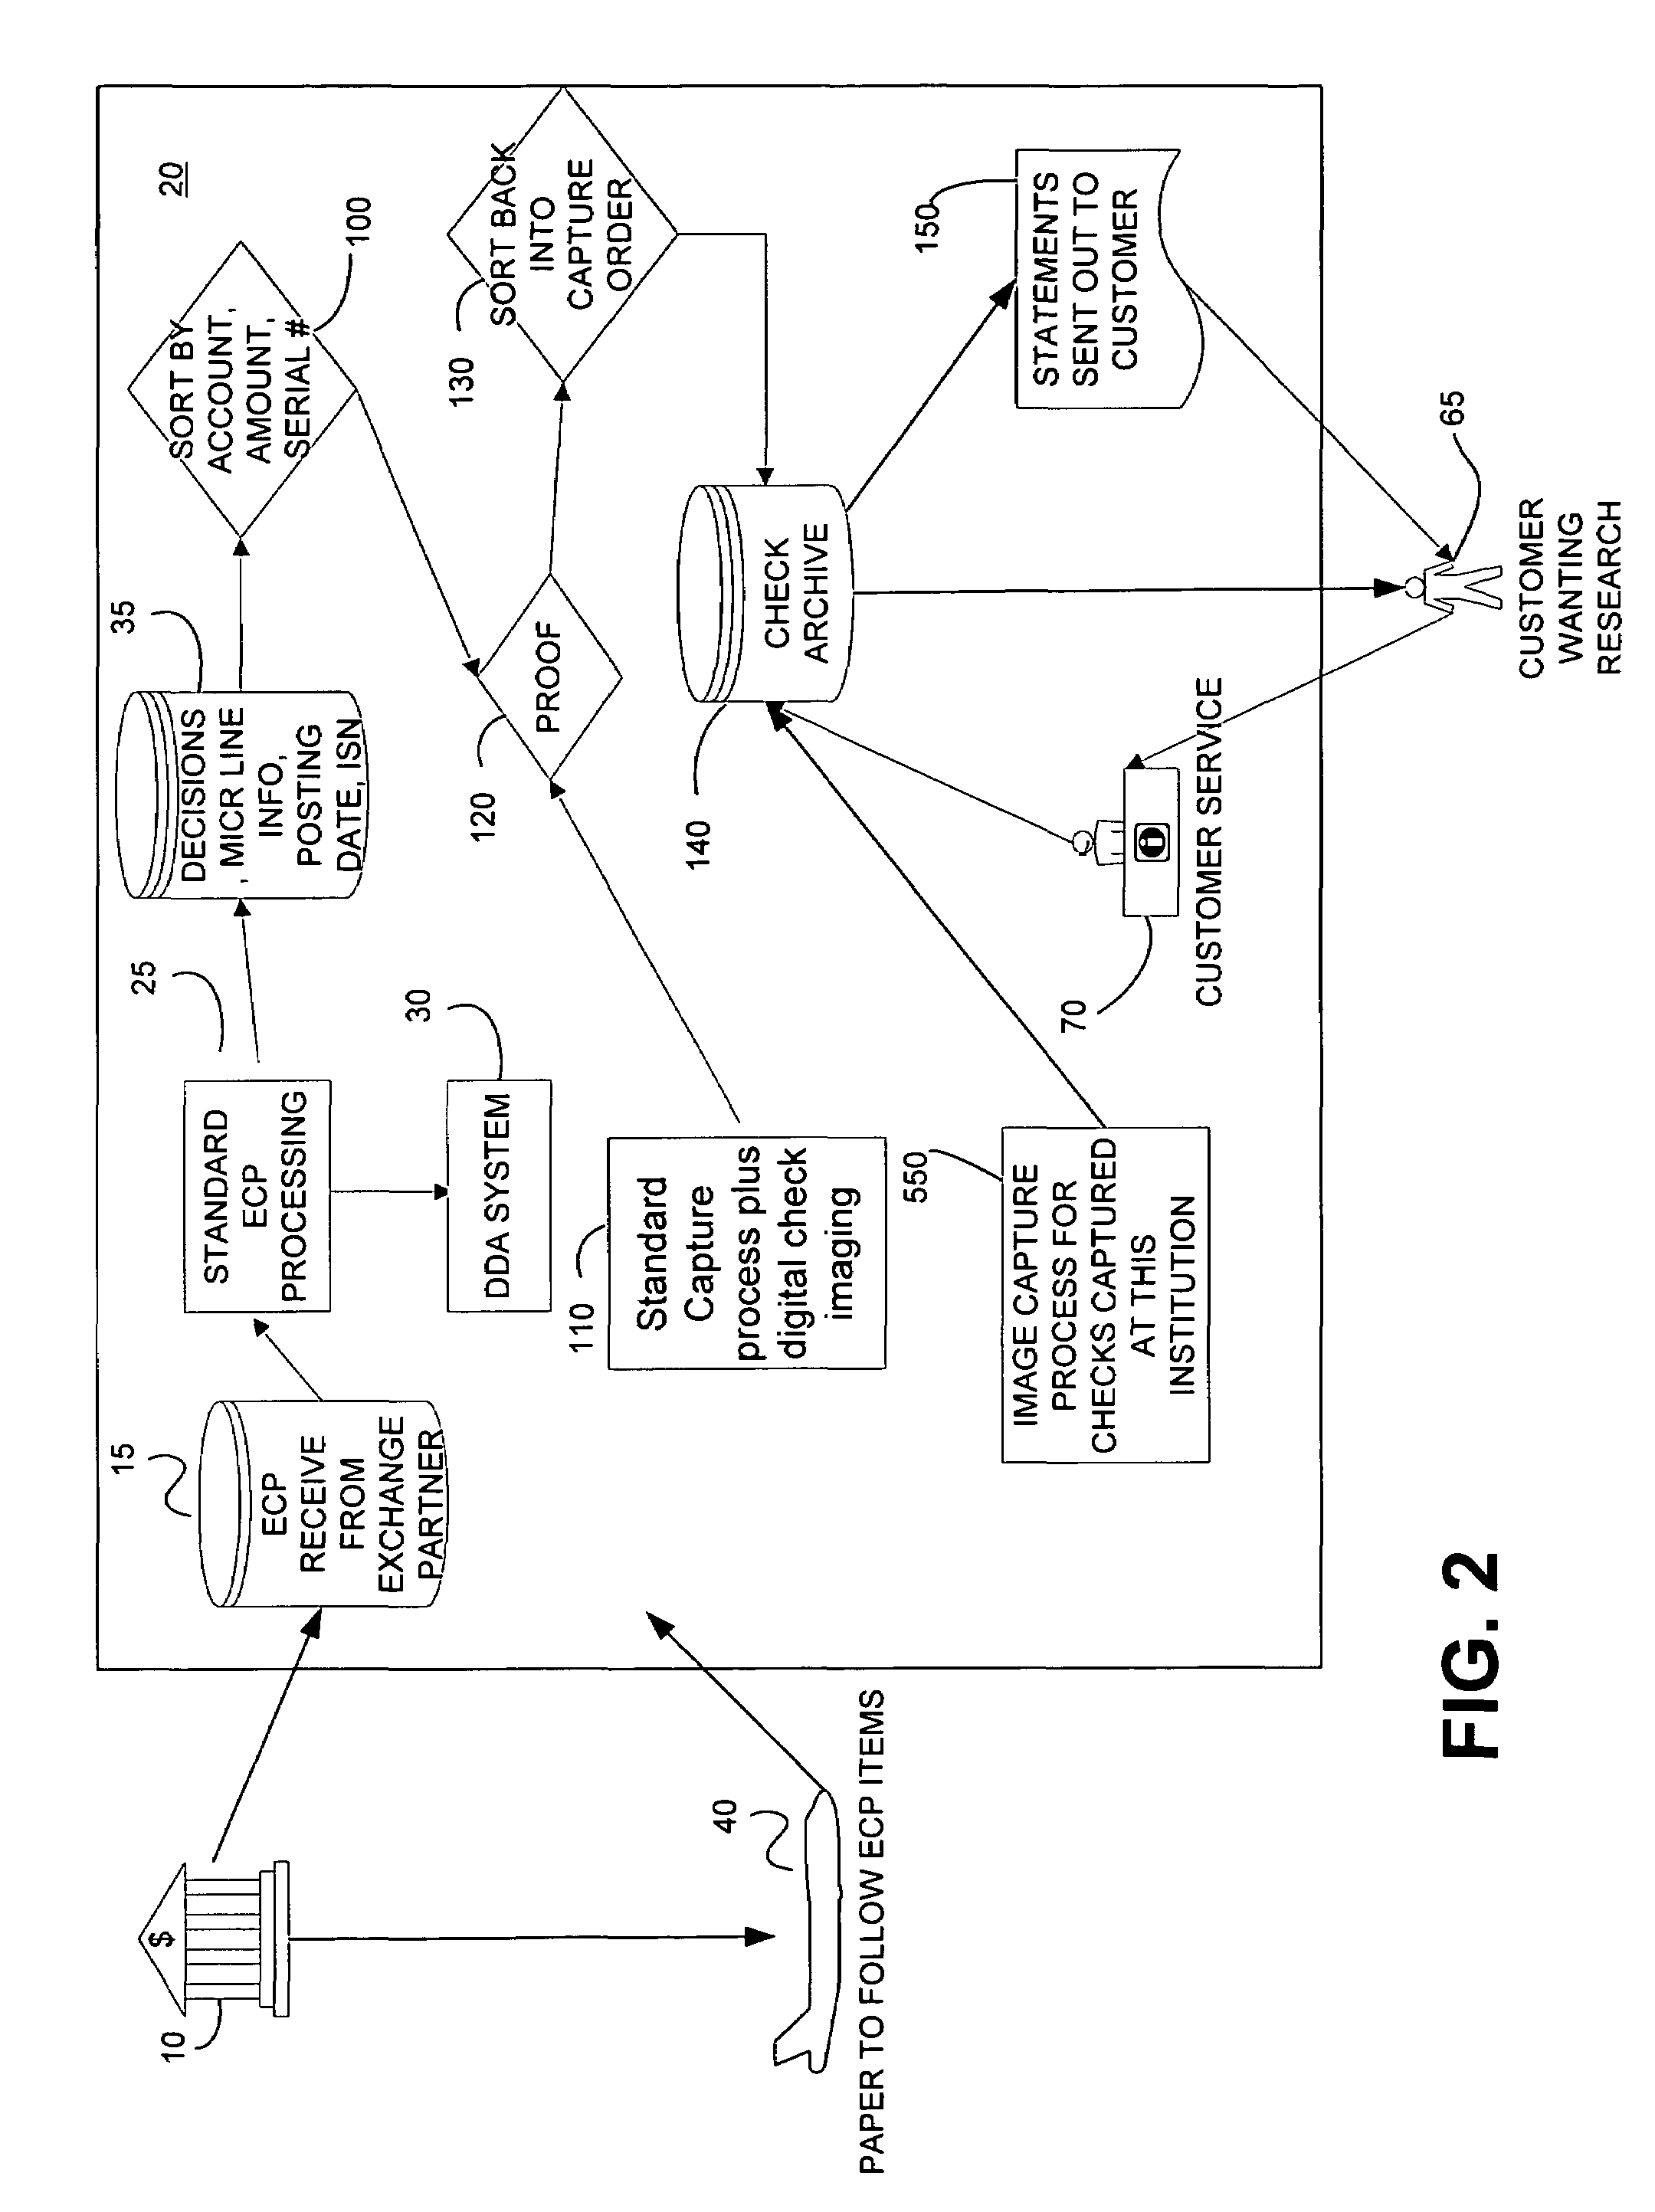 Electronic check presentment system and method having an item sequence capability